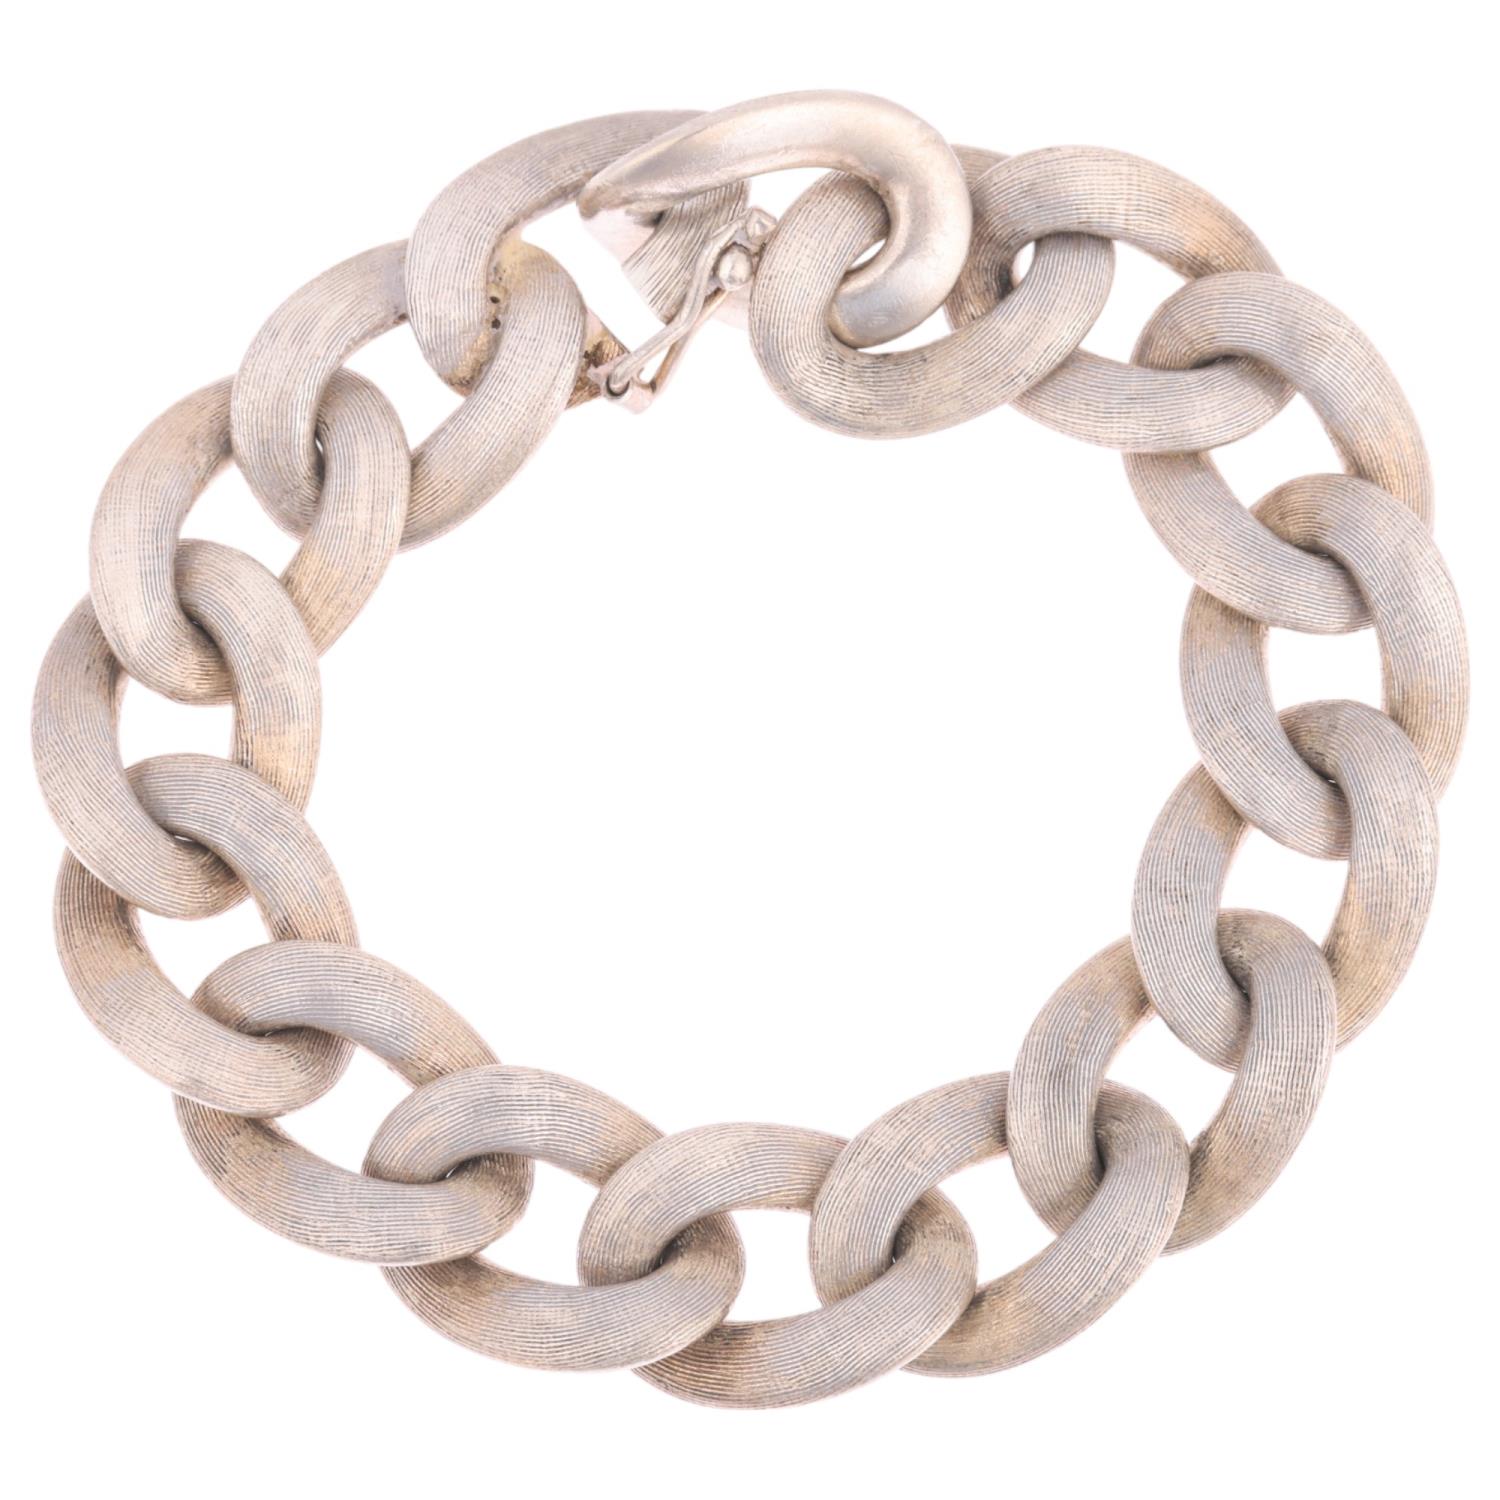 A heavy sterling silver cable link chain bracelet, textured and polished decoration, 19cm, 71.3g